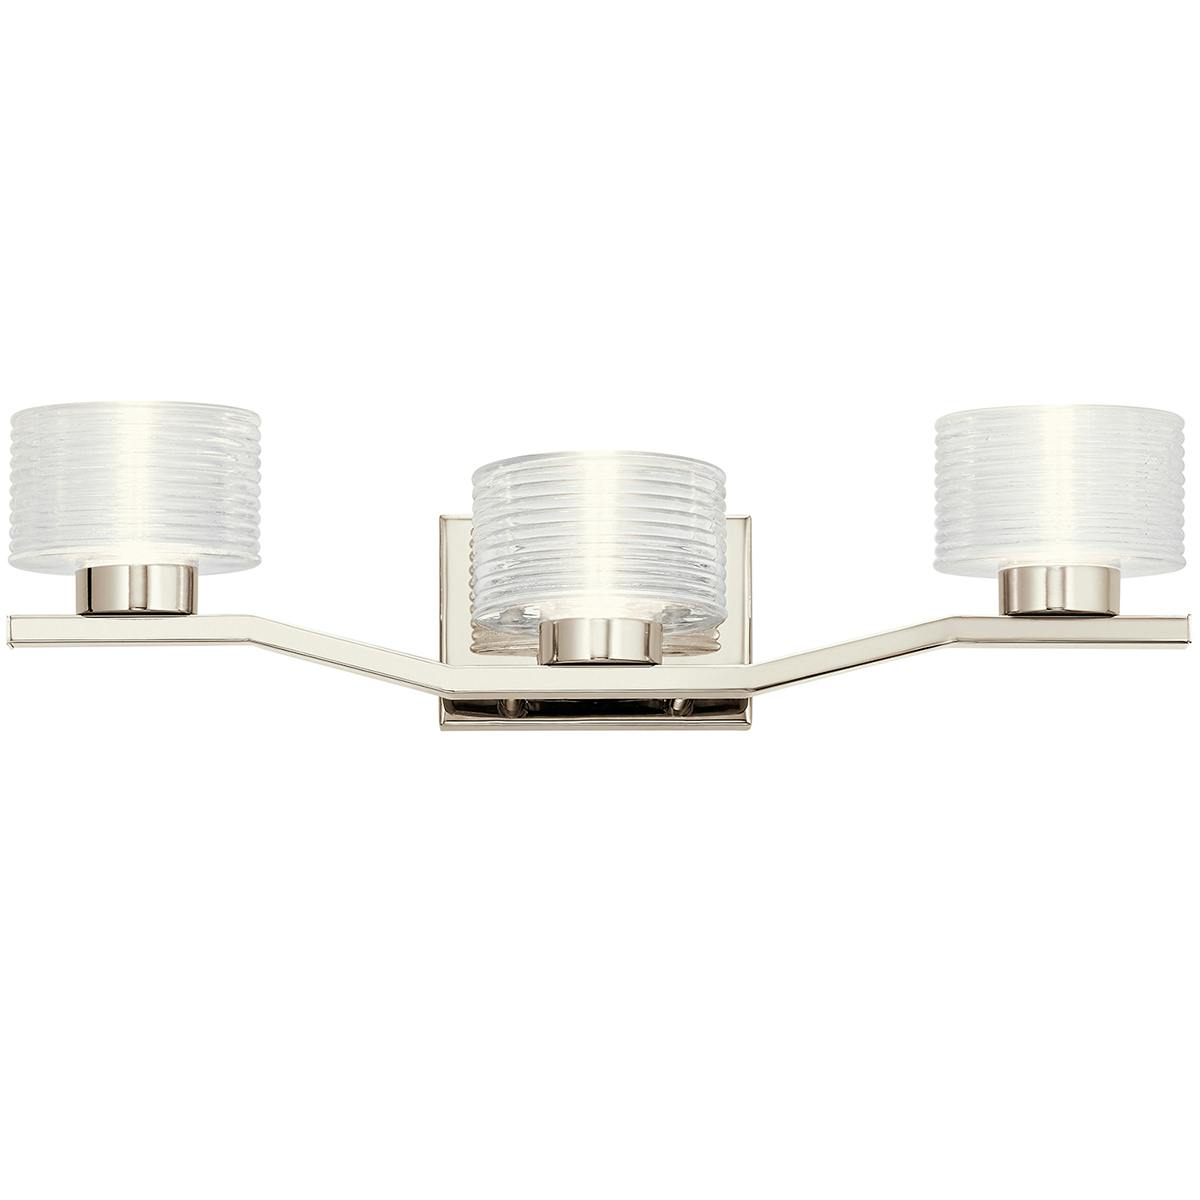 Front view of the Lasus™ 3 Light LED Vanity Light on a white background